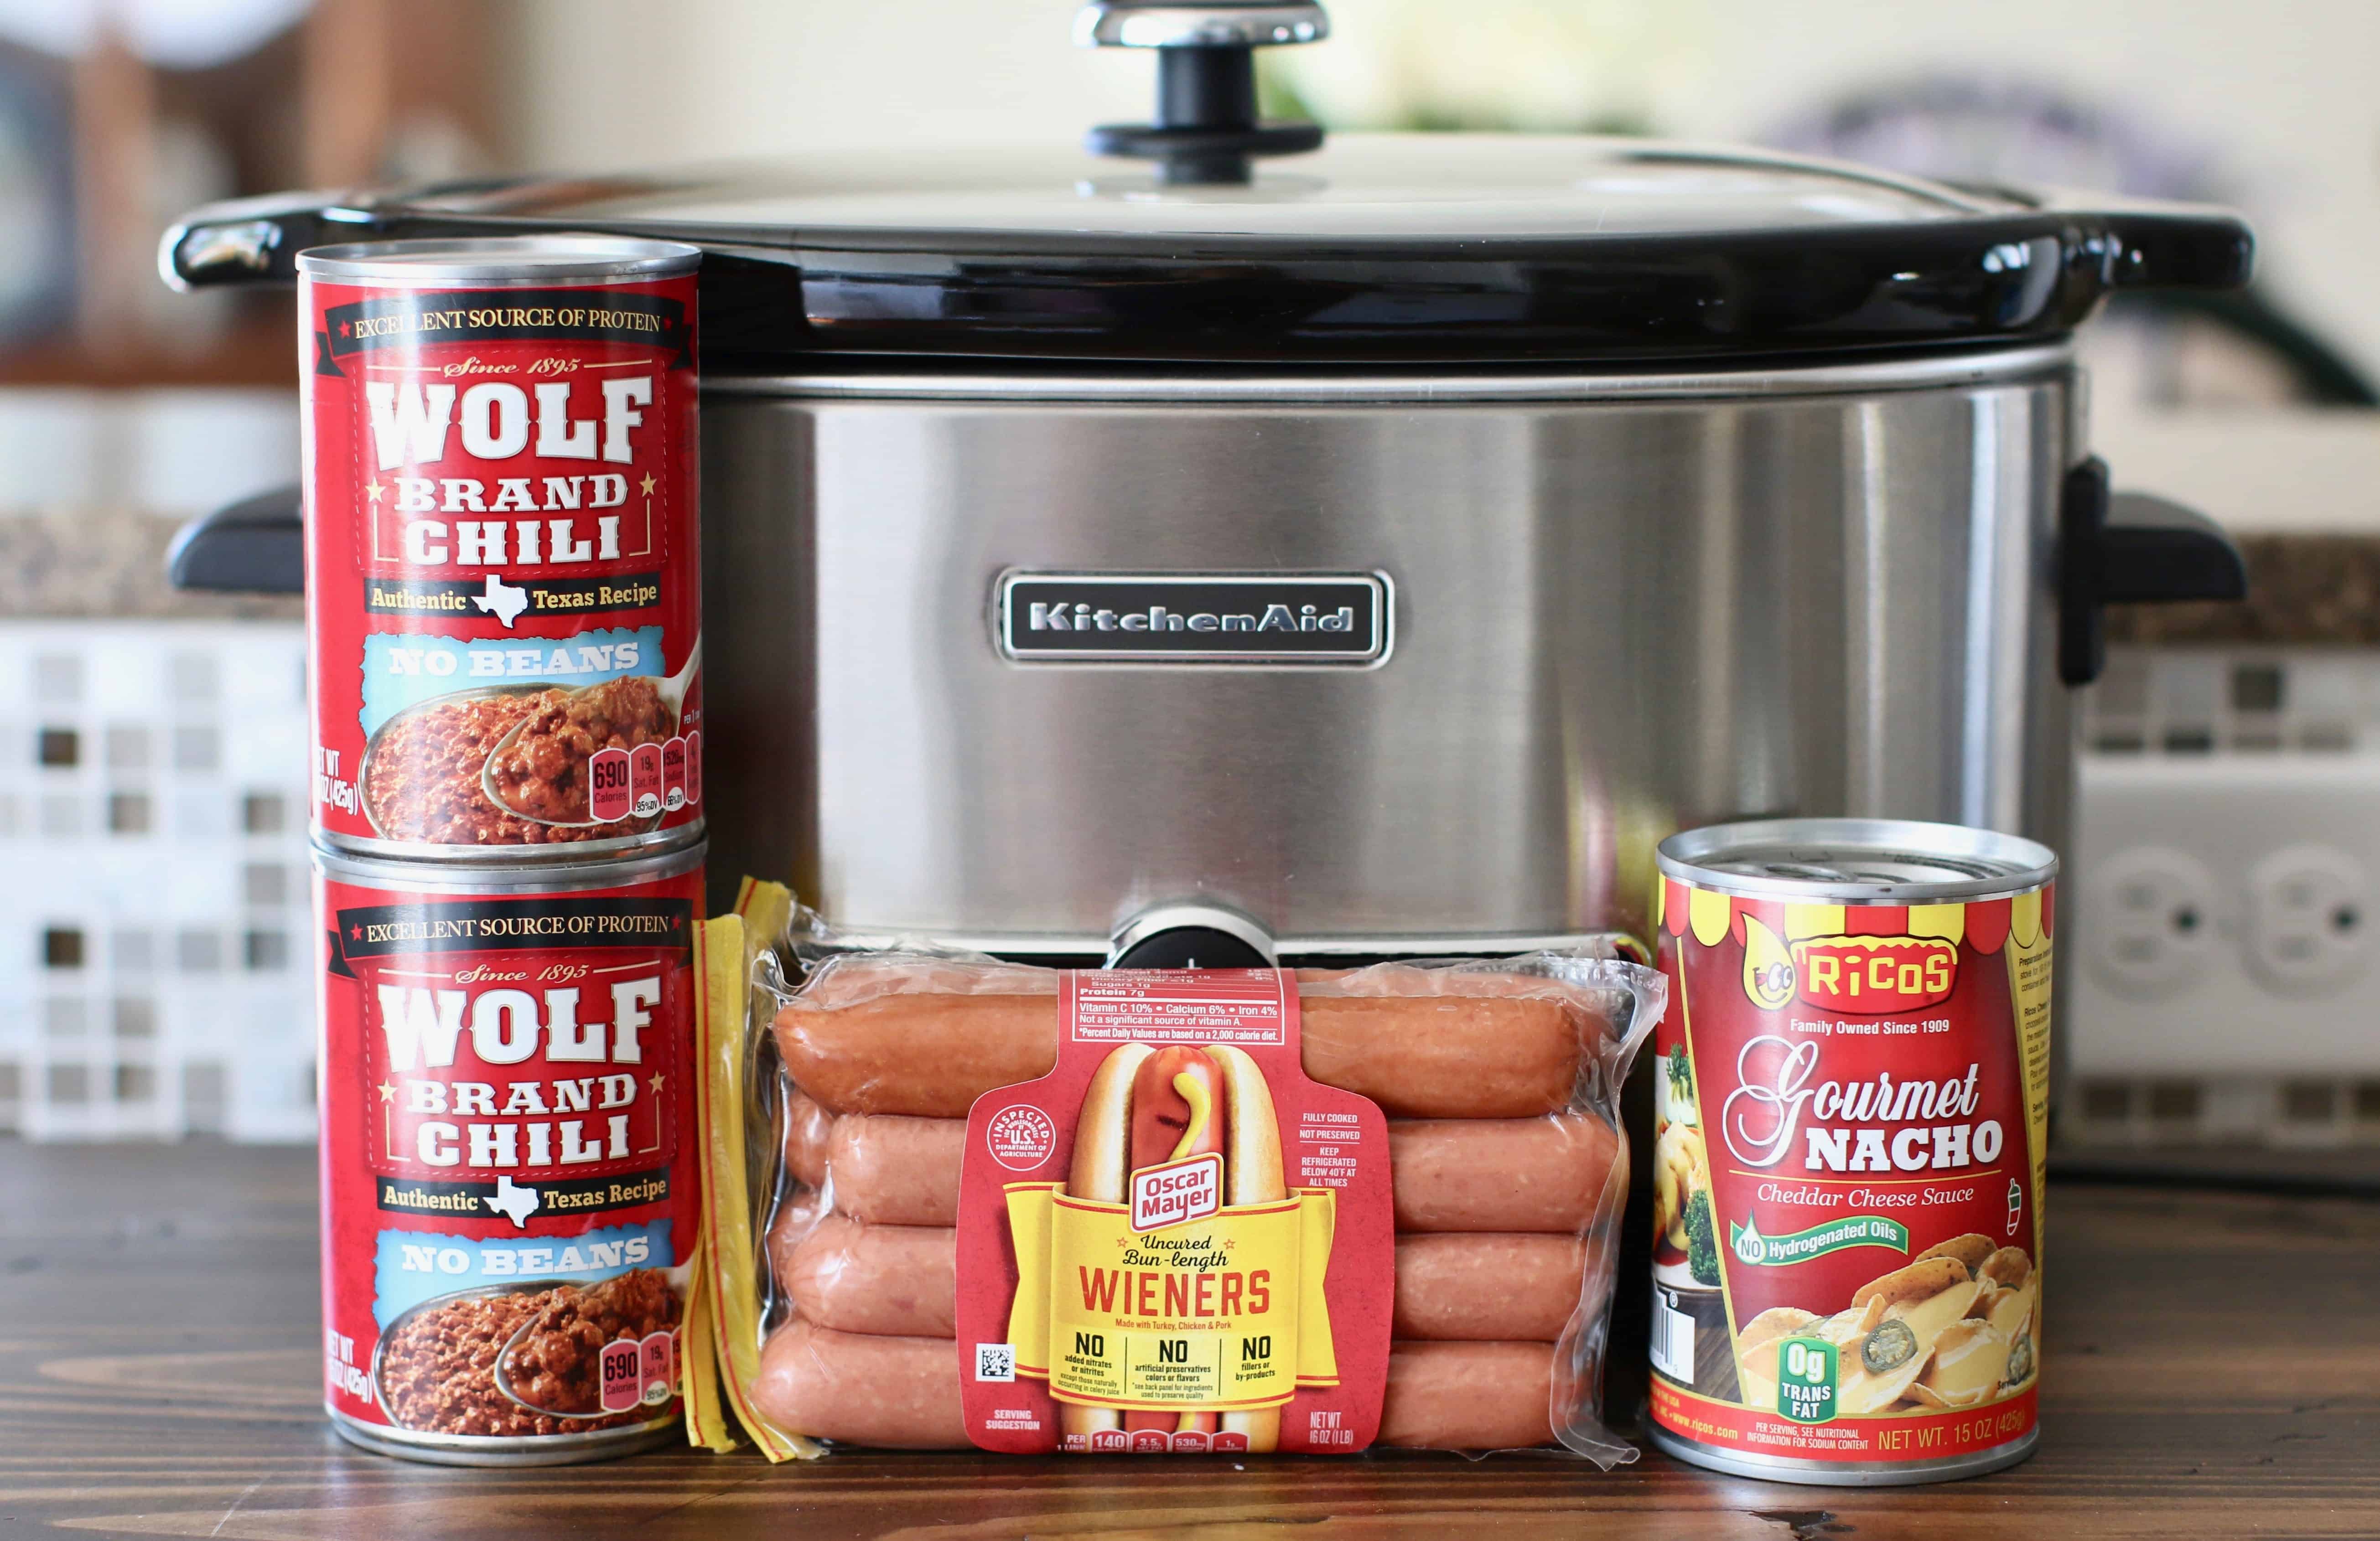 5-quart slow cooker, Oscar Meyer hot dogs, nacho cheese sauce, wolf brand chili (no beans).